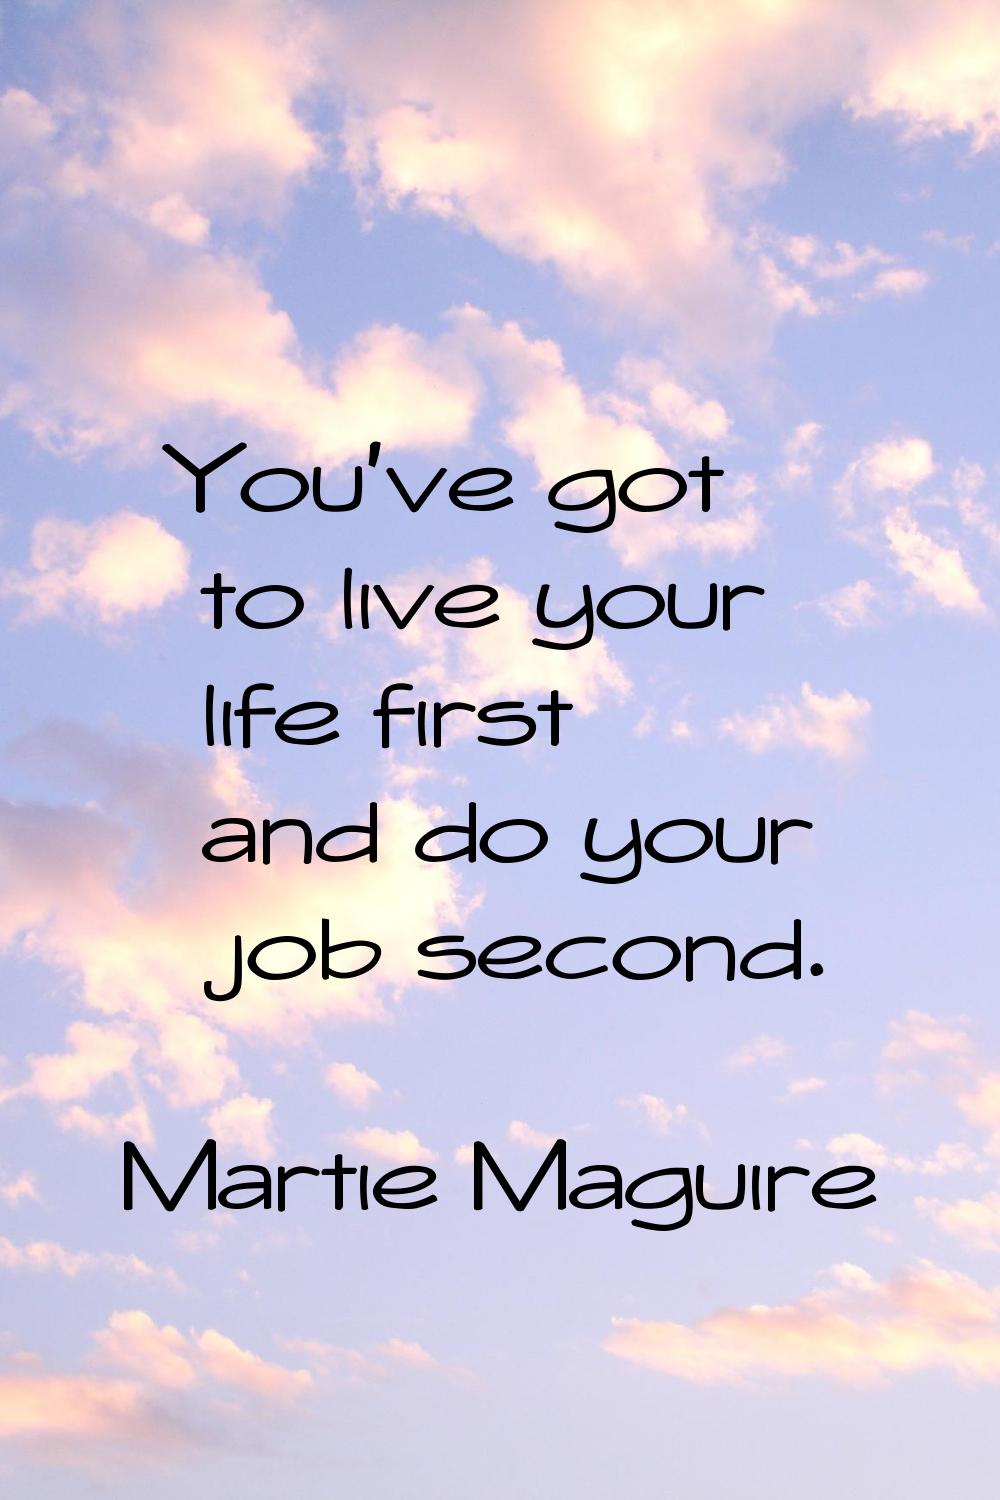 You've got to live your life first and do your job second.